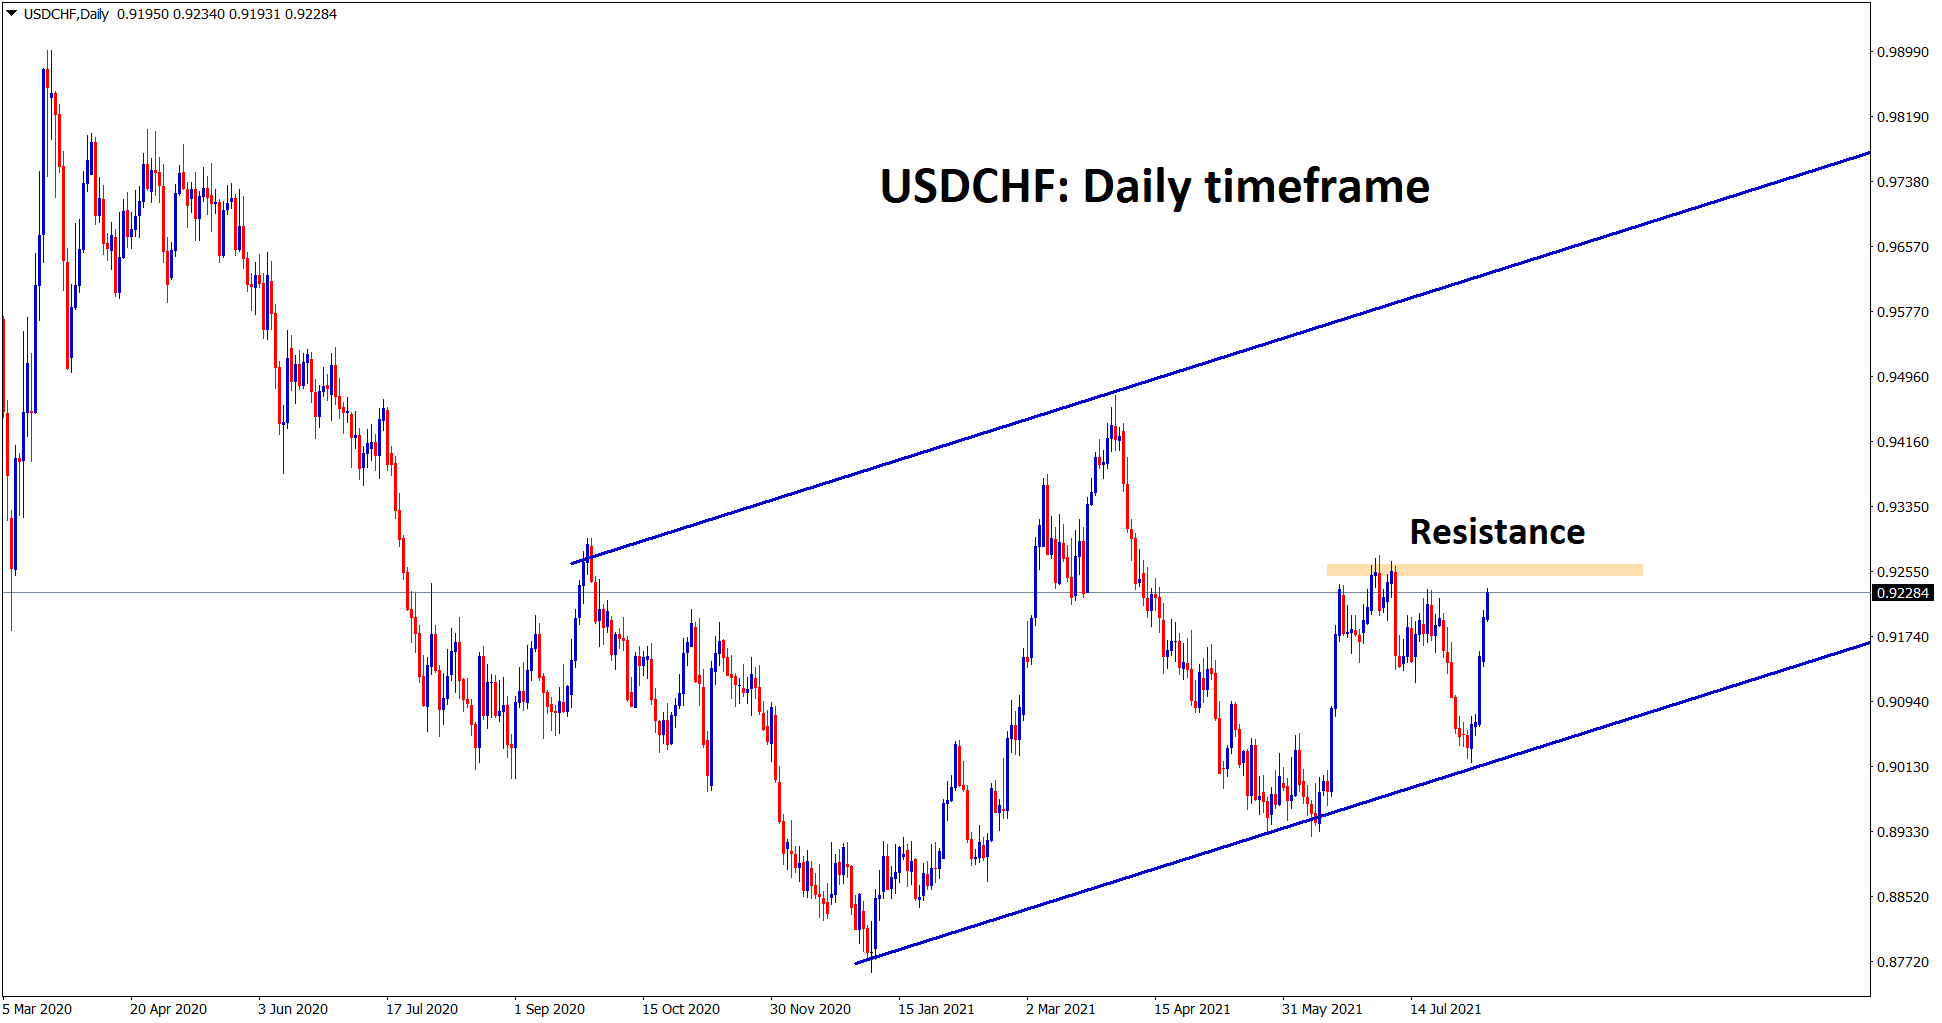 USDCHF has moved up continuously to the recent high if it breaks the top we can expect a big movement to the top